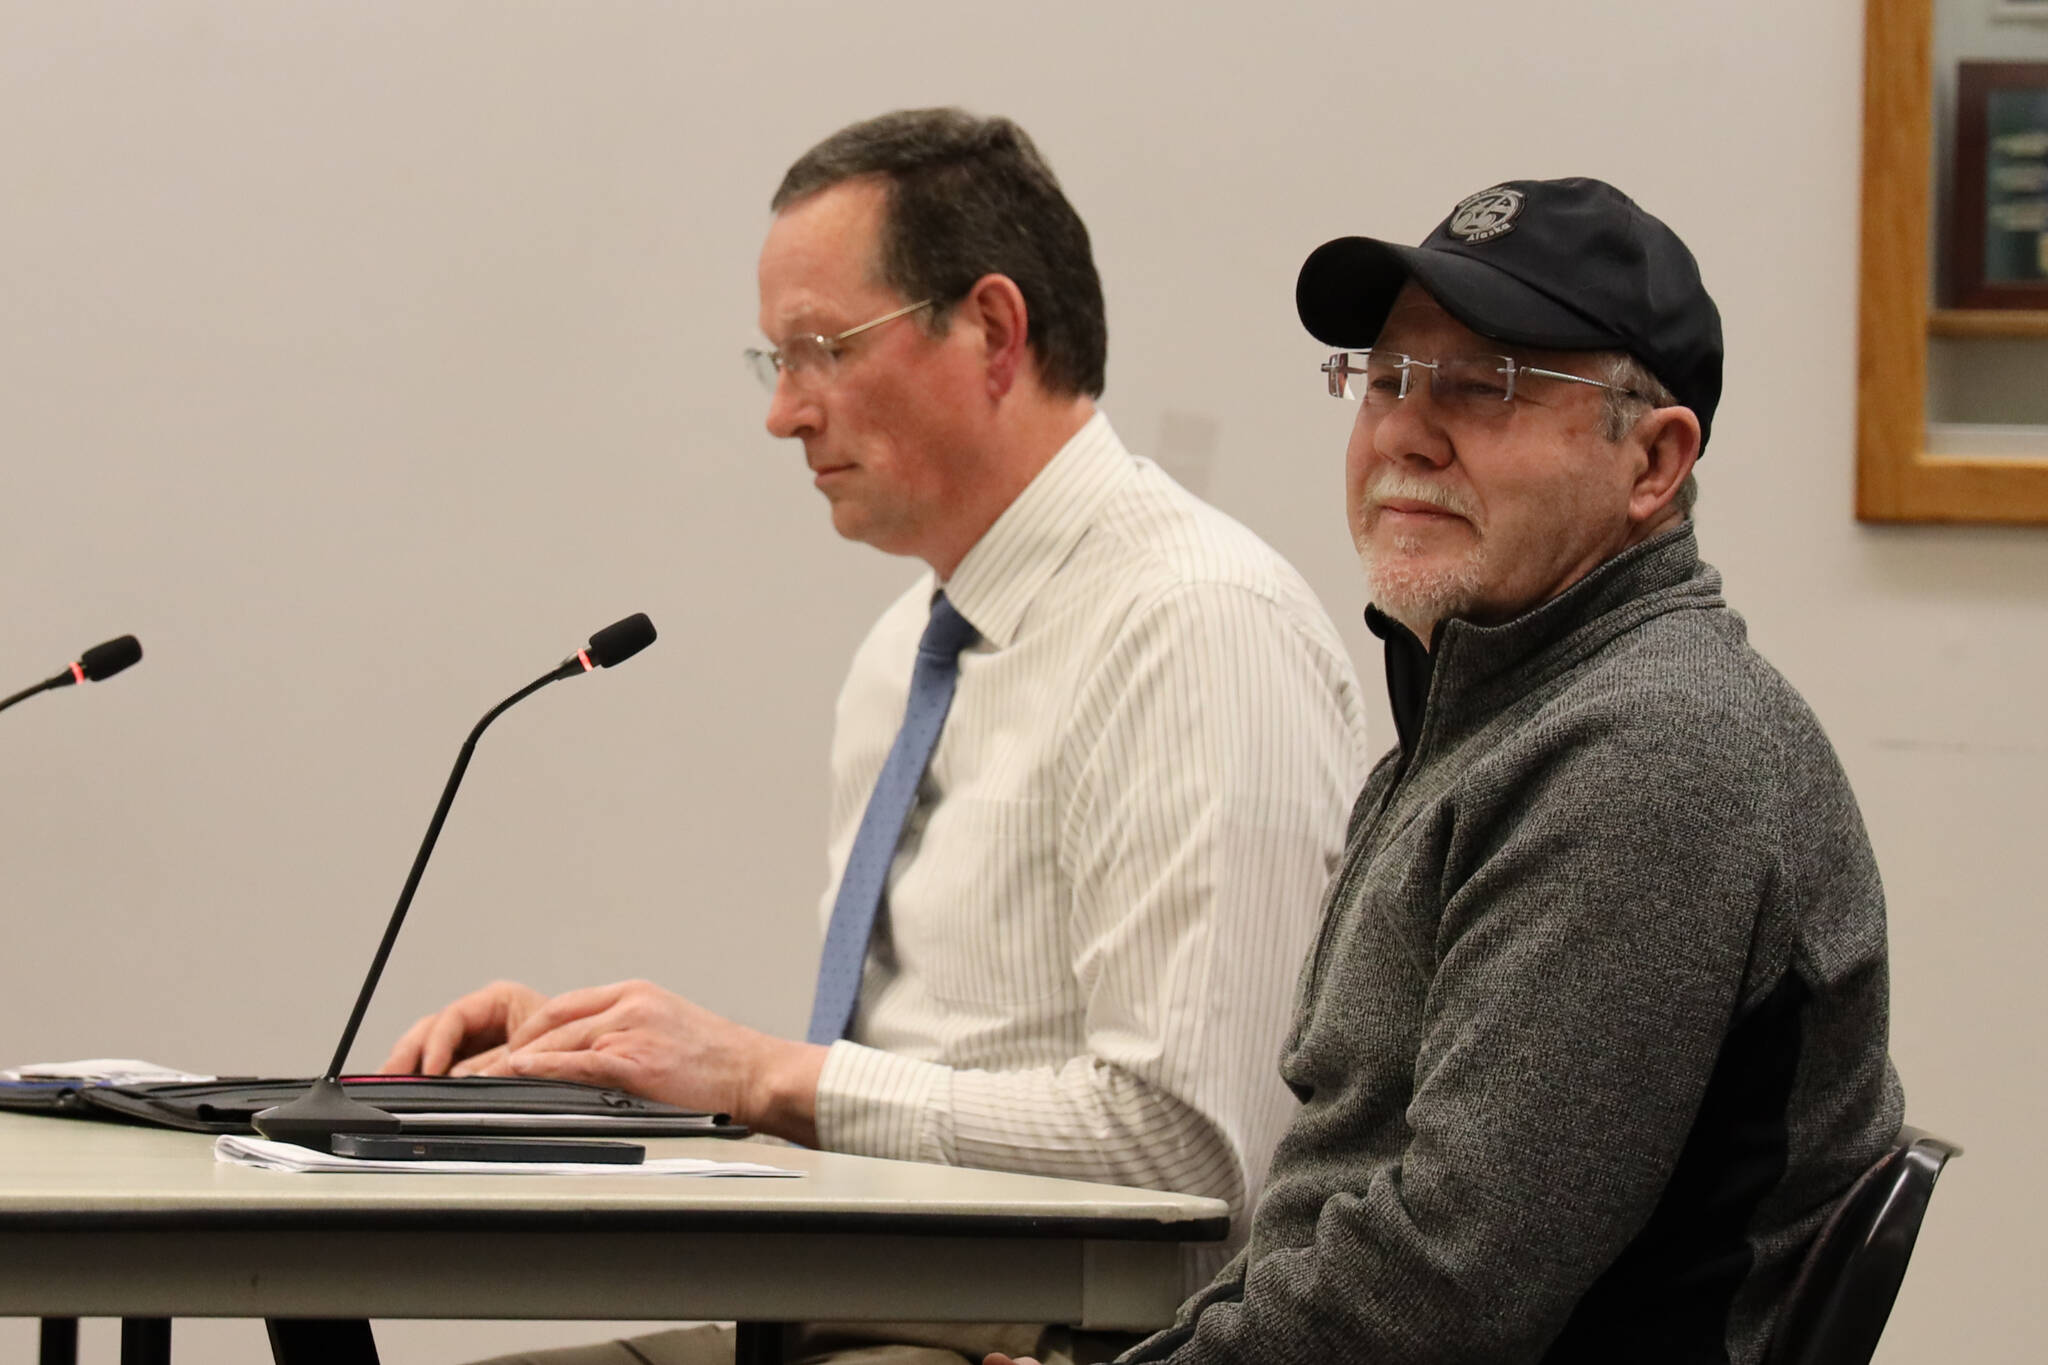 Ride Alaska co-owners James King, left, and Reuben Willis, right, speak to the Assembly meeting as the Committee of the Whole Monday evening to discuss their proposed business venture to bring electric-assisted bicycle tours to West Douglas’ Pioneer Road. (Clarise Larson / Juneau Empire)